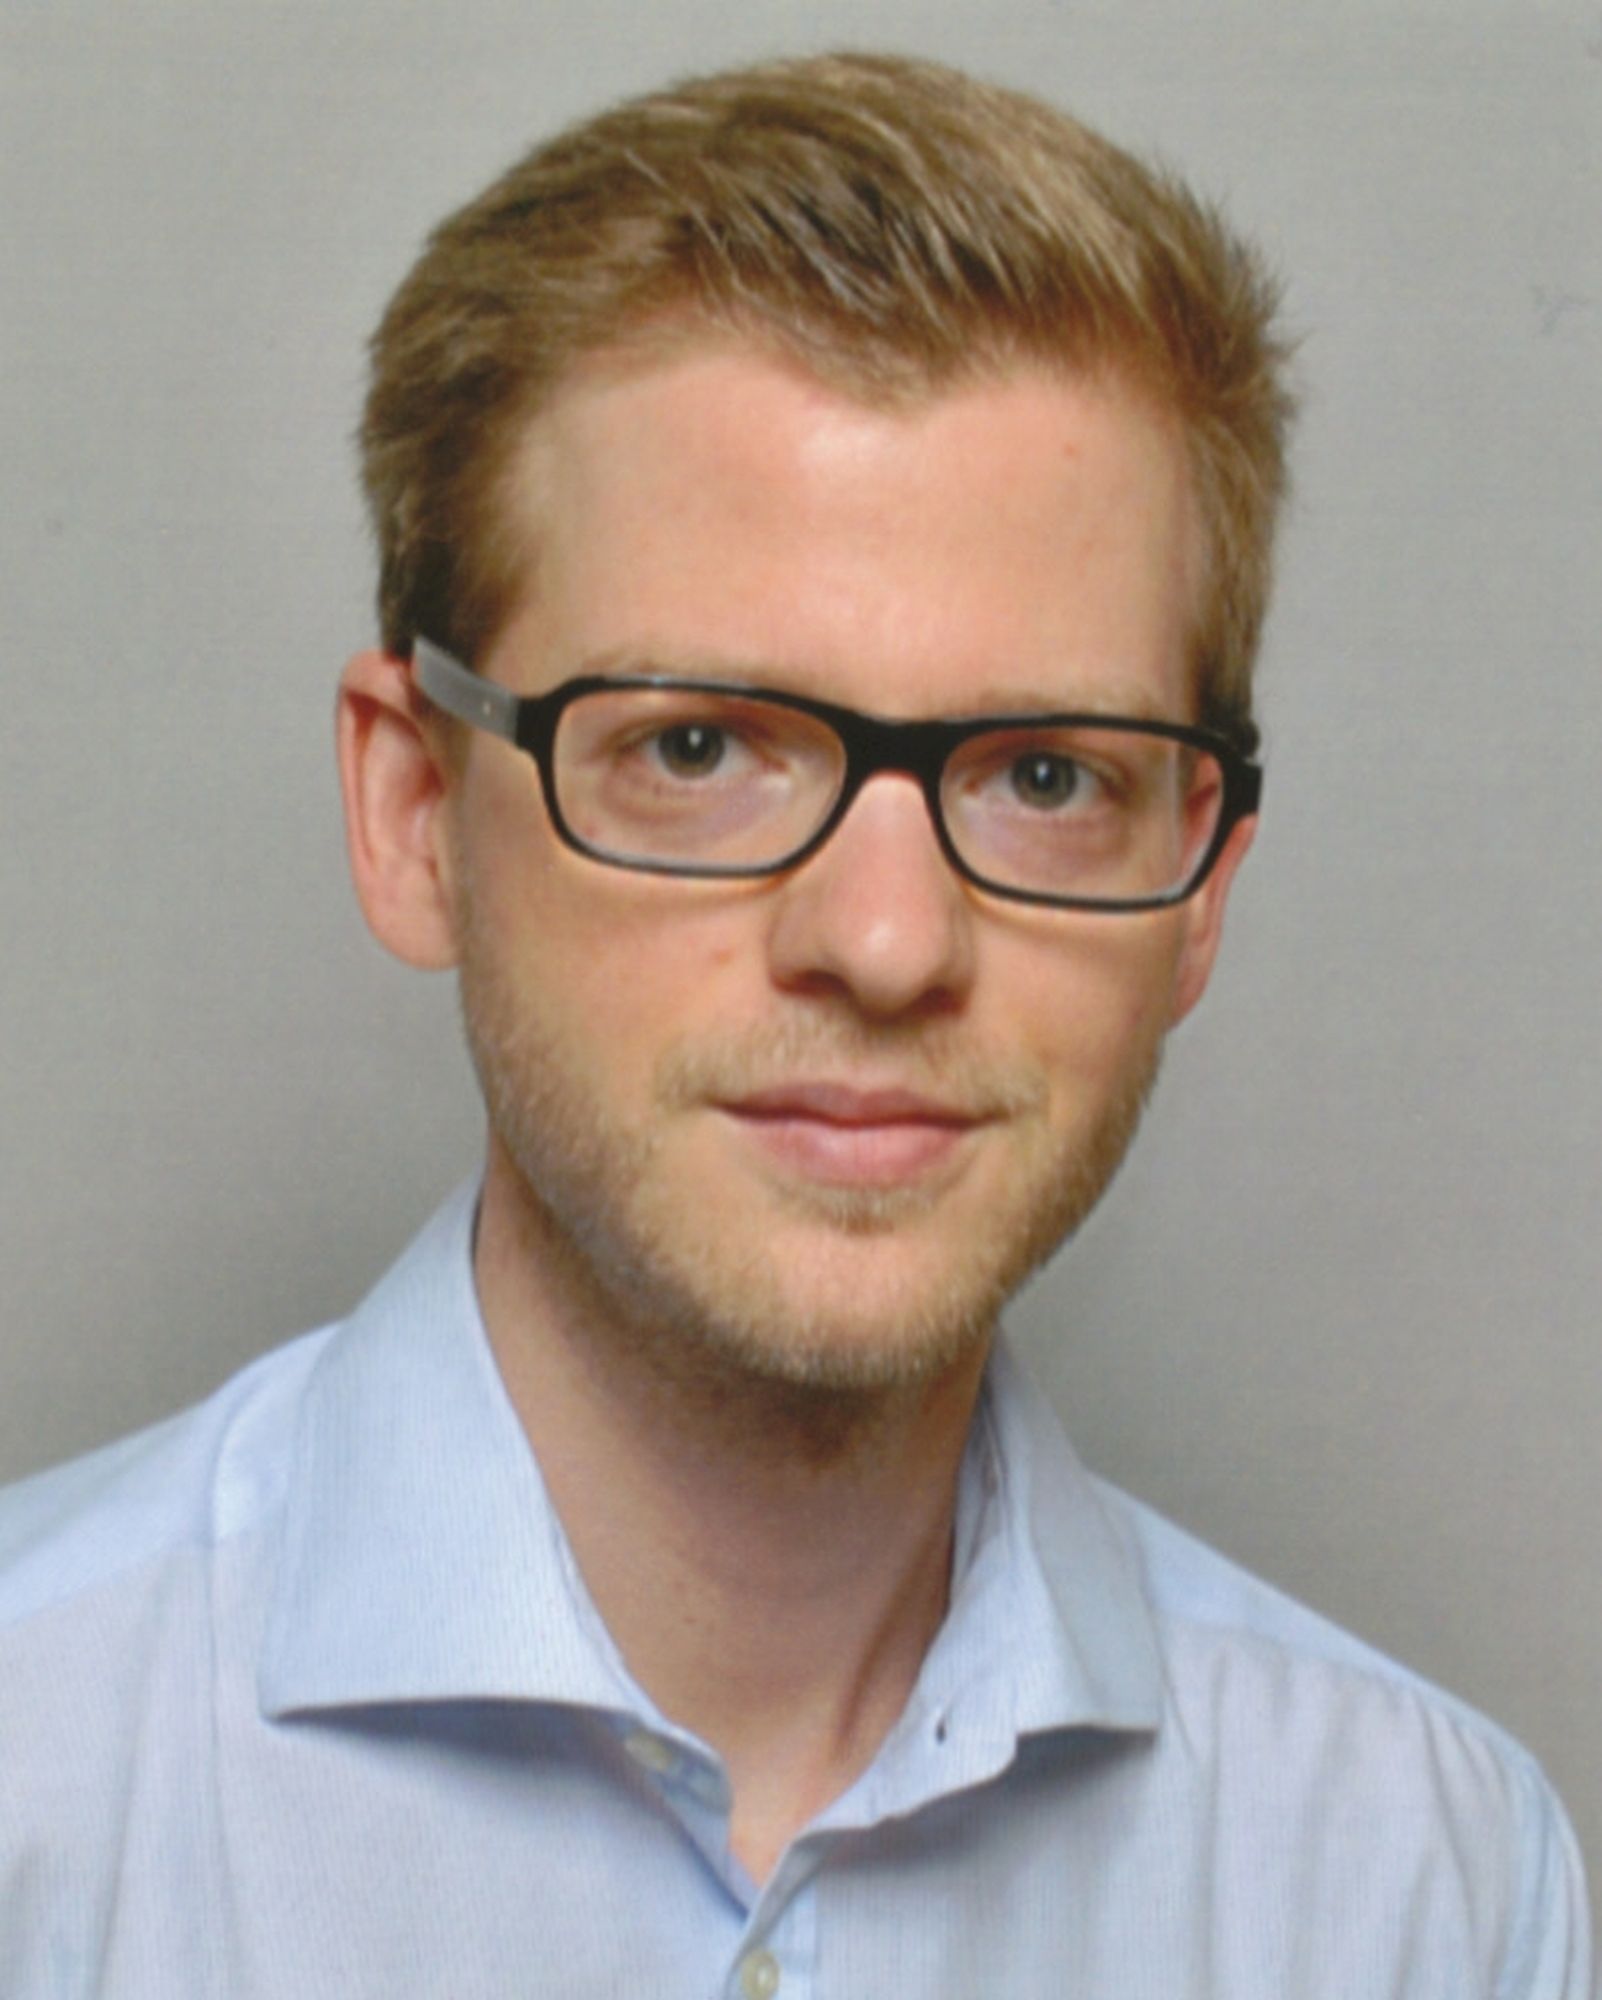 Thomas Zussner, BSc